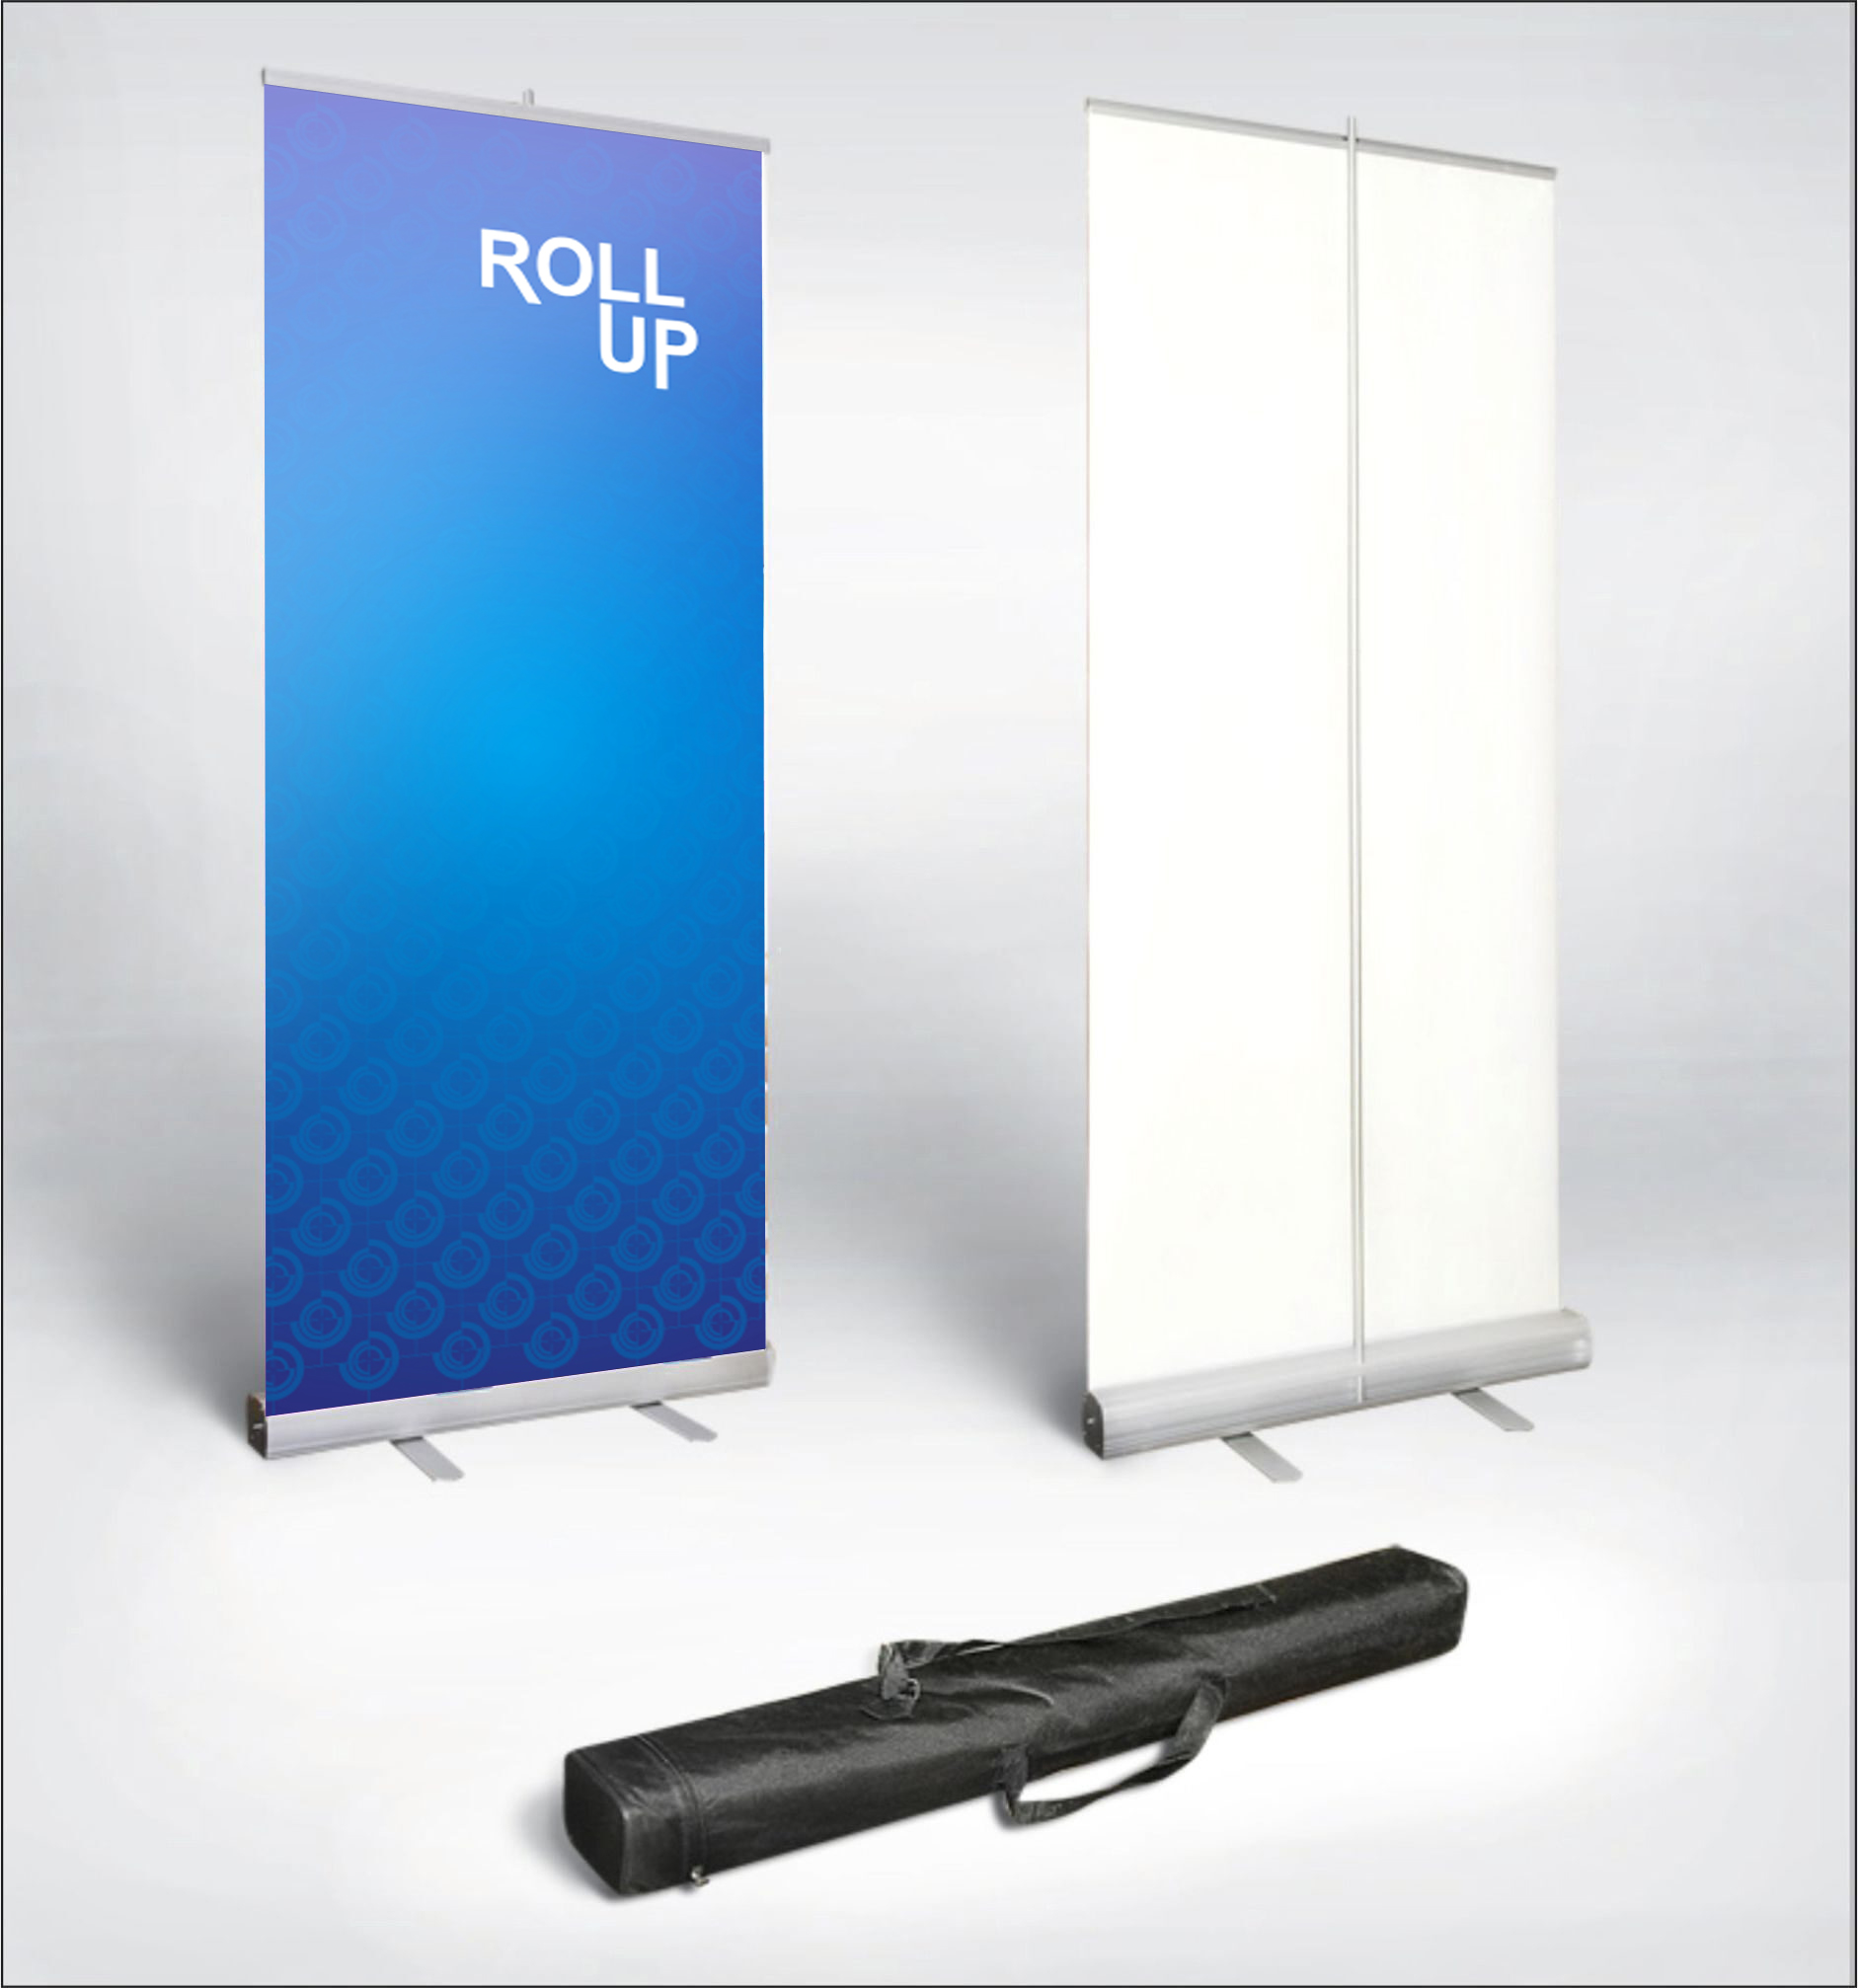 Roll Up (Retractable Banners)